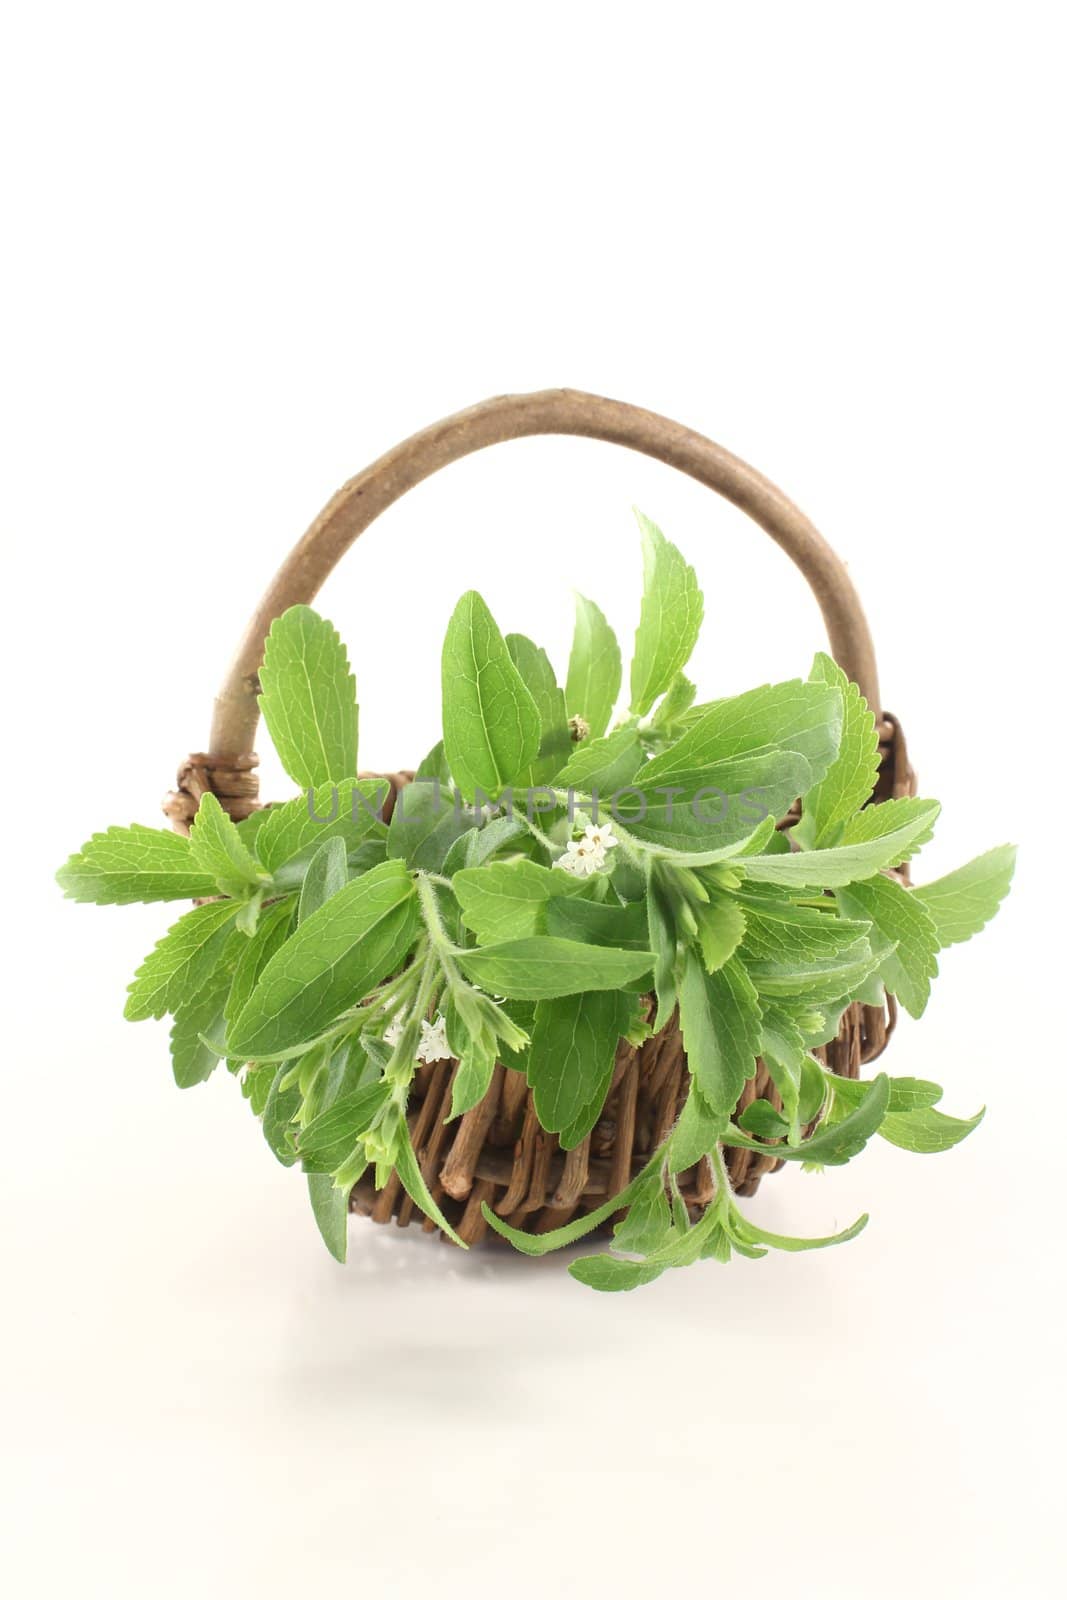 fresh green Stevia with white flowers in a basket on light background